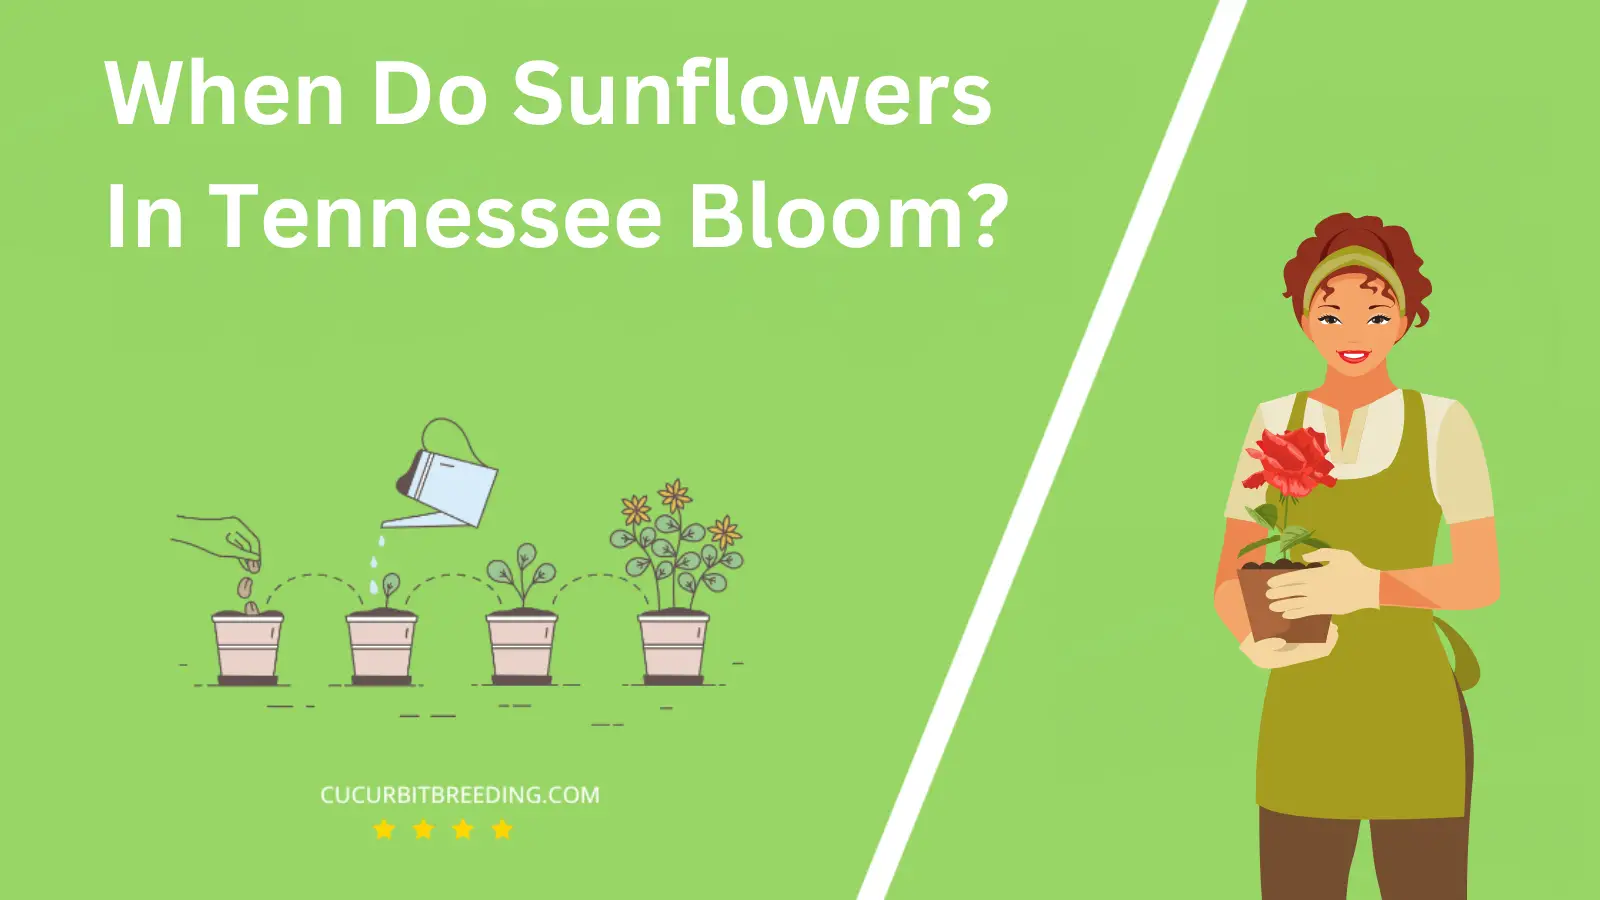 When Do Sunflowers In Tennessee Bloom?